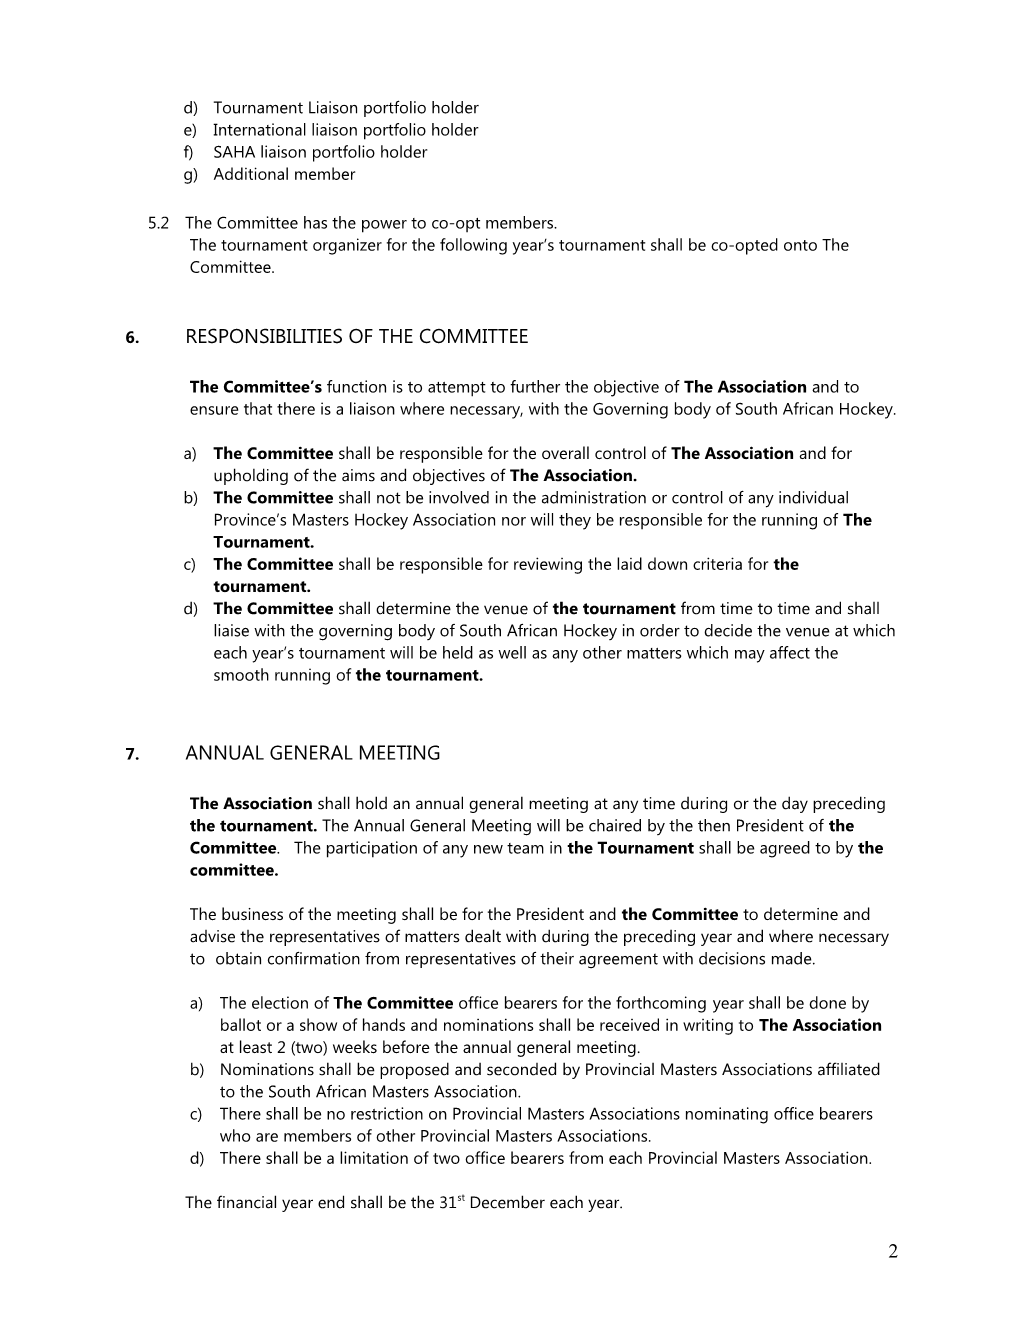 The South African Masters Hockey Constitution As at August 2005